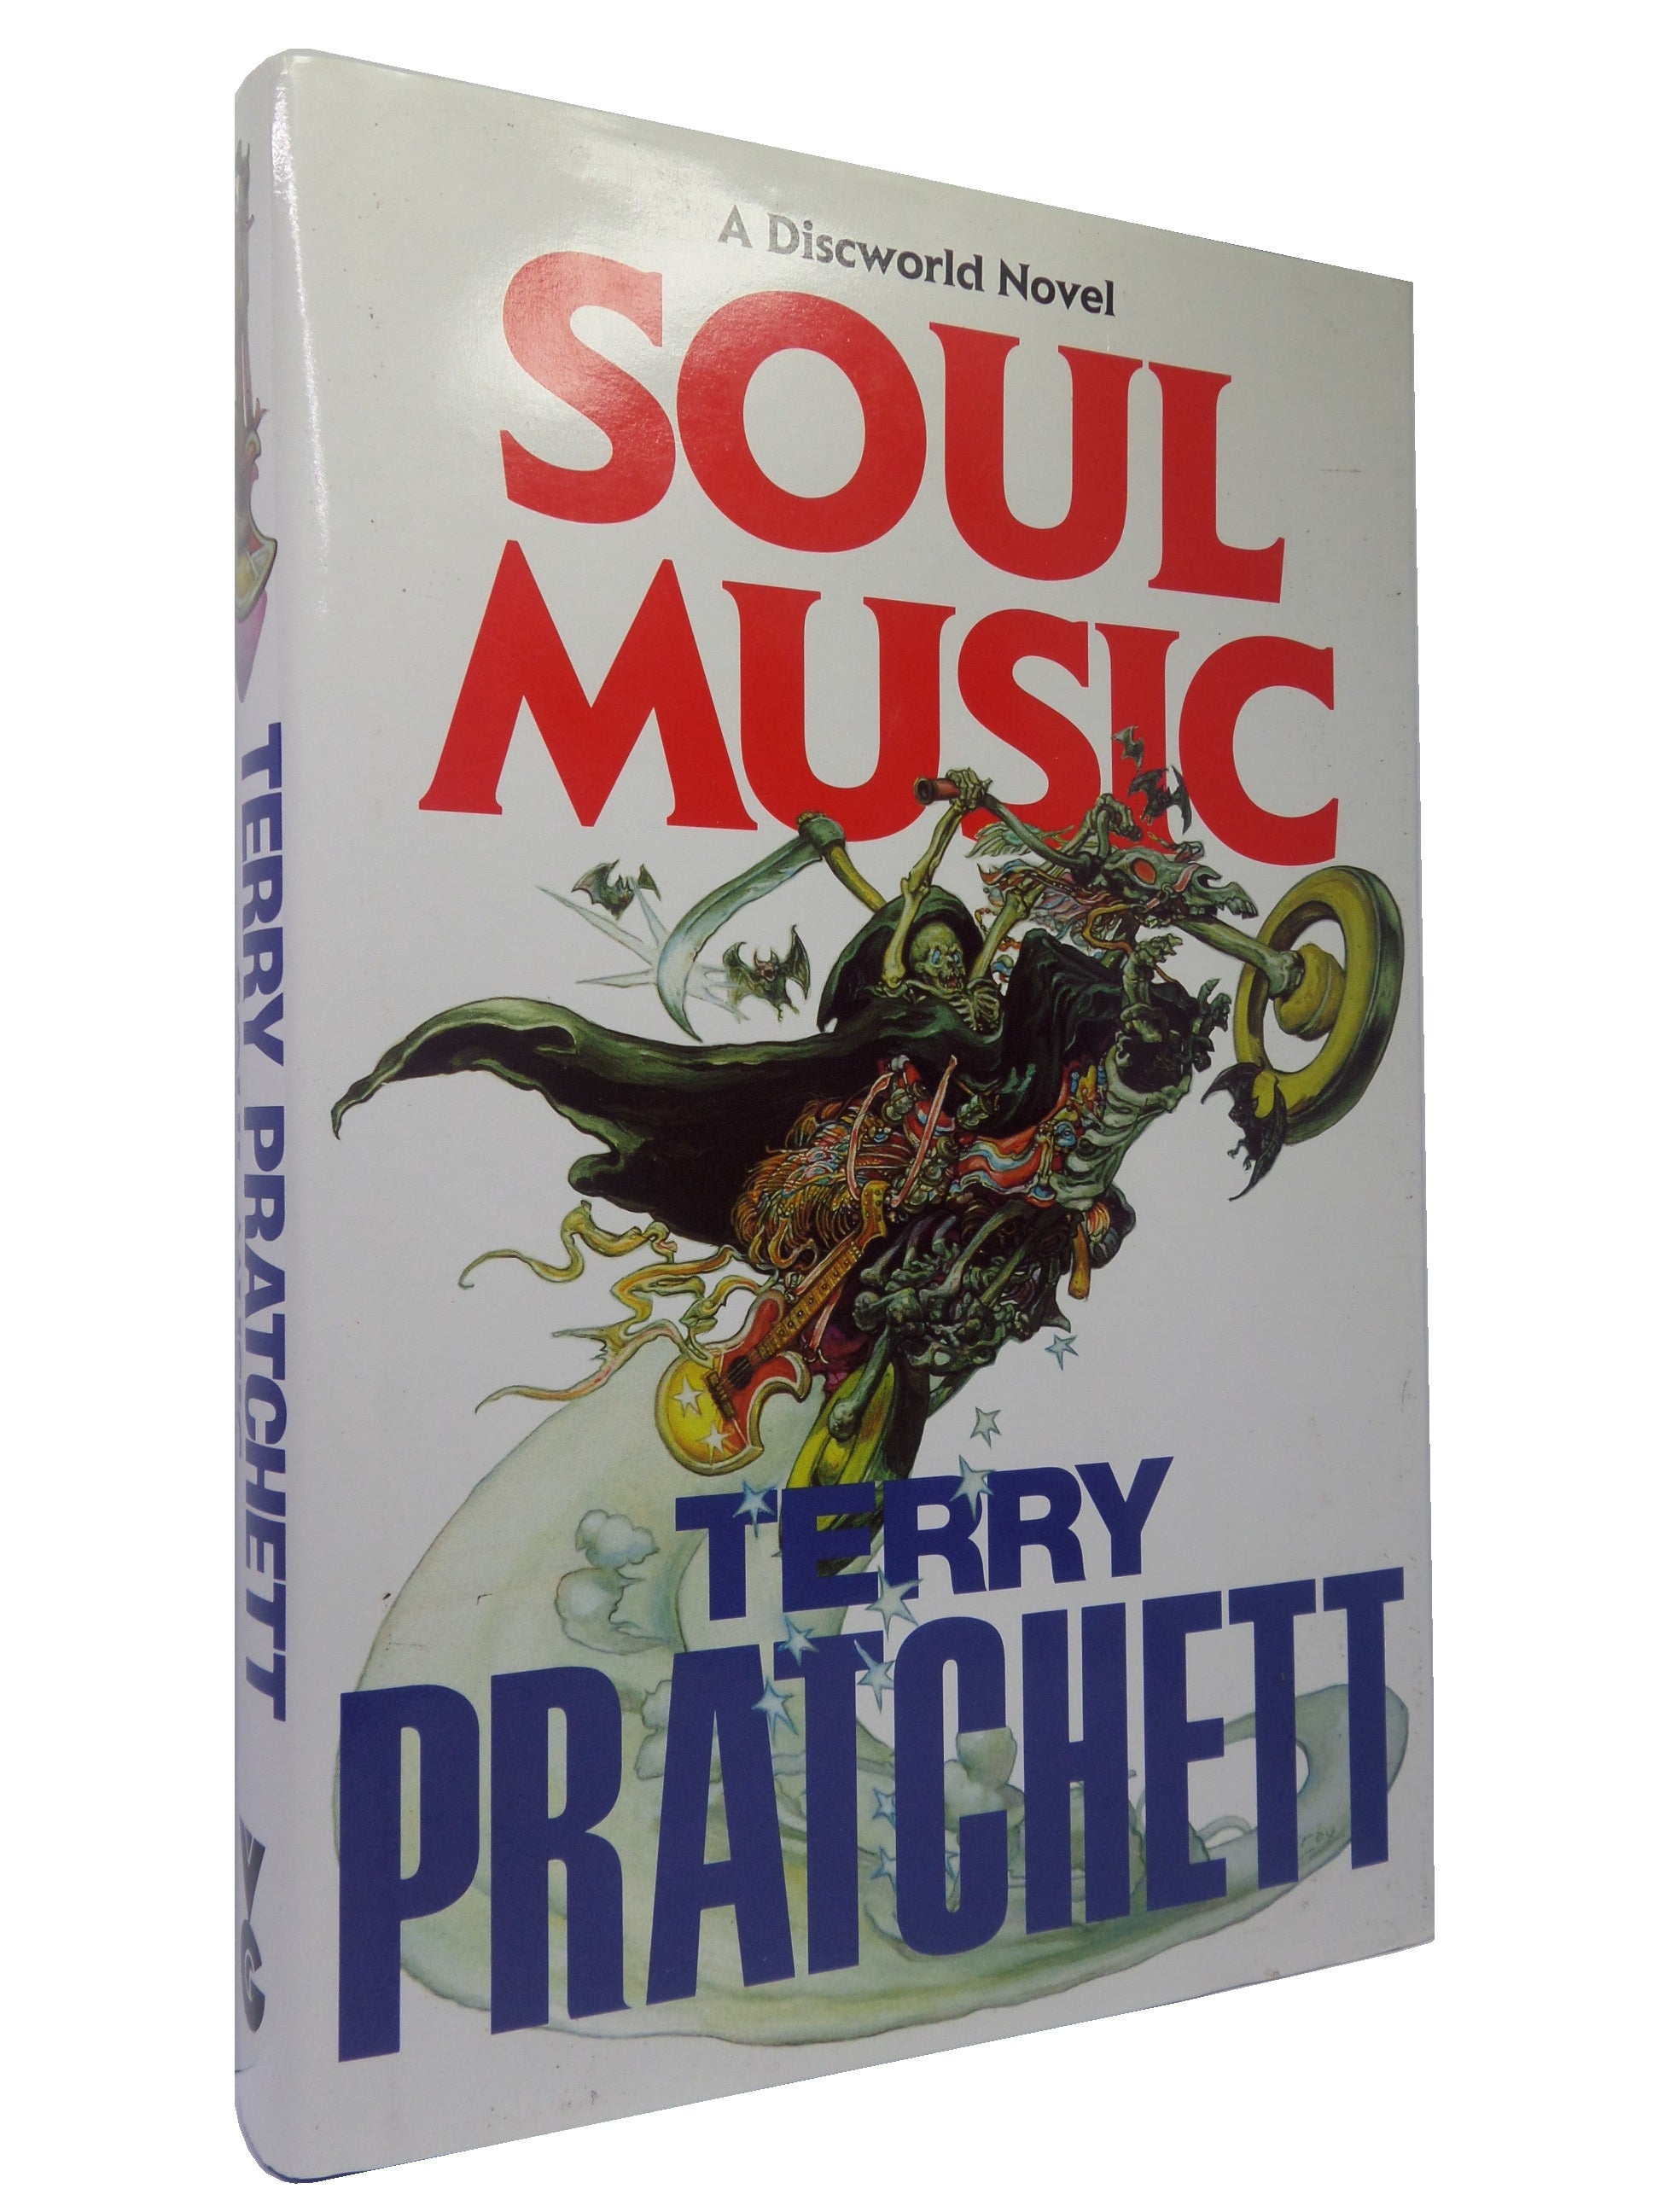 SOUL MUSIC BY TERRY PRATCHETT 1994 SIGNED FIRST EDITION [HARDBACK]